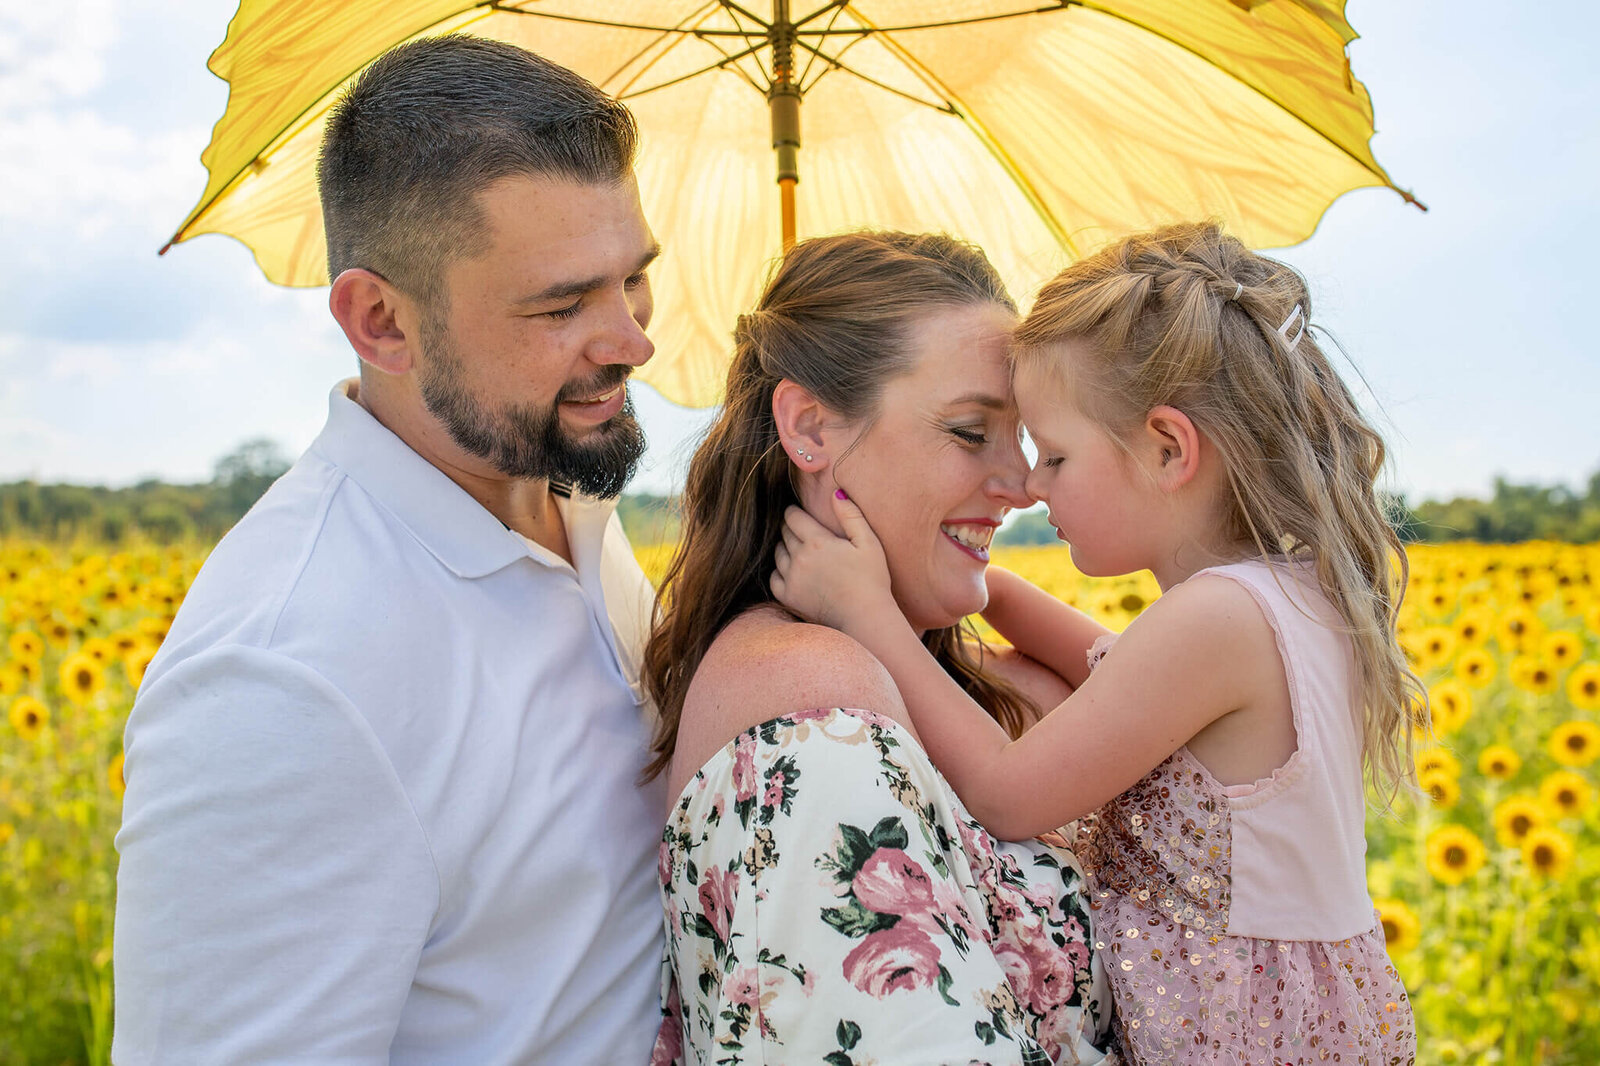 A family of three snuggling under an umbrella in a sunflower field in Northern Virginia.